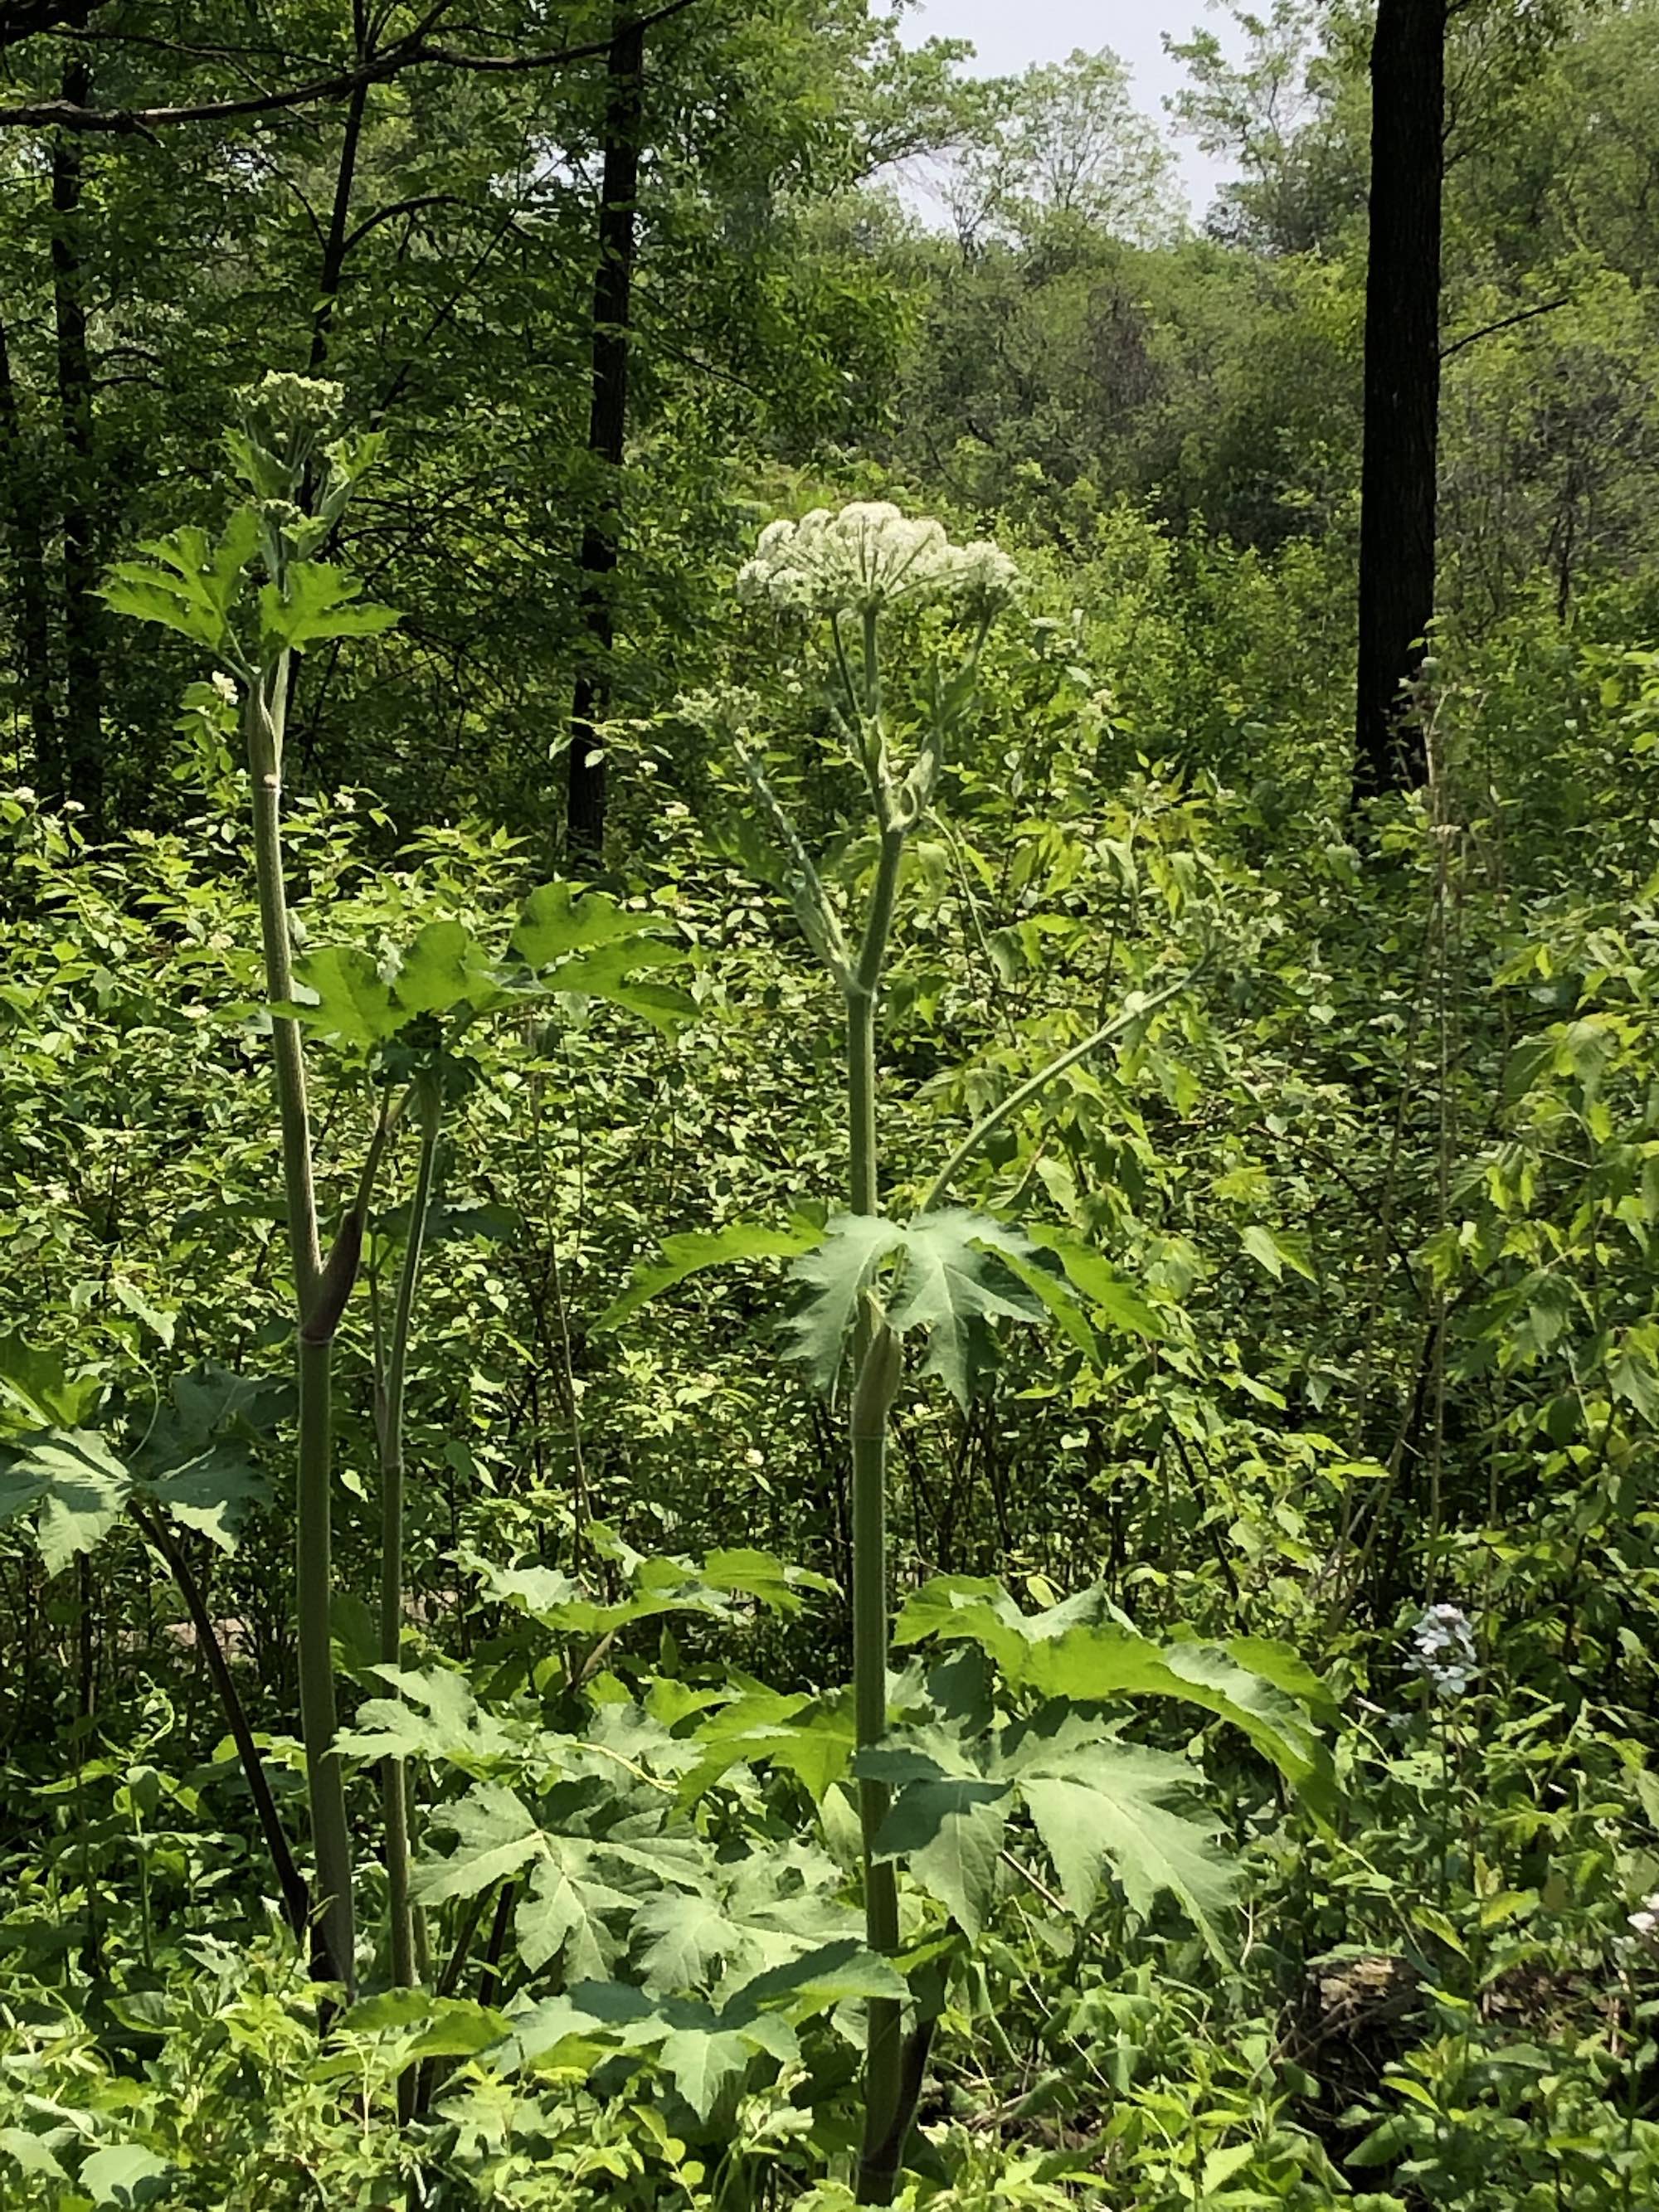 Cow Parsnip near Council Ring in Oak Savanna on May 31, 2019.